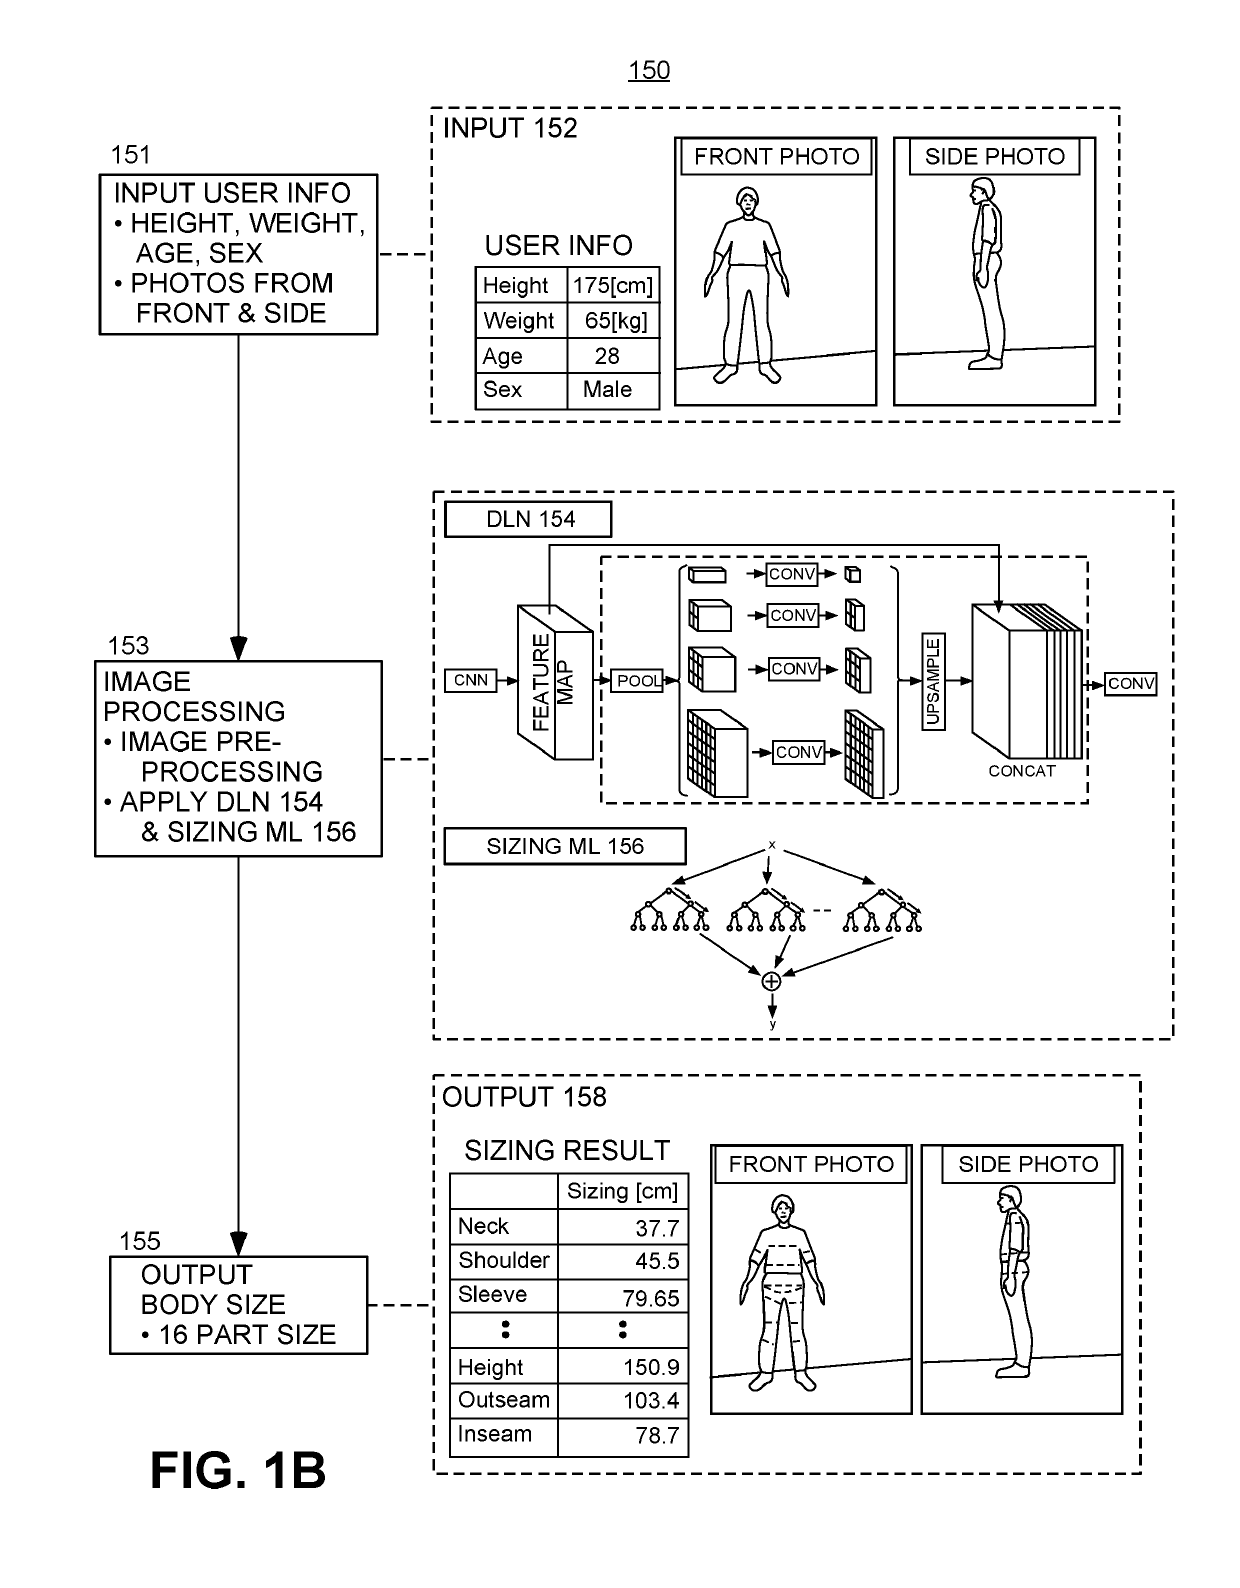 Systems and methods for full body measurements extraction